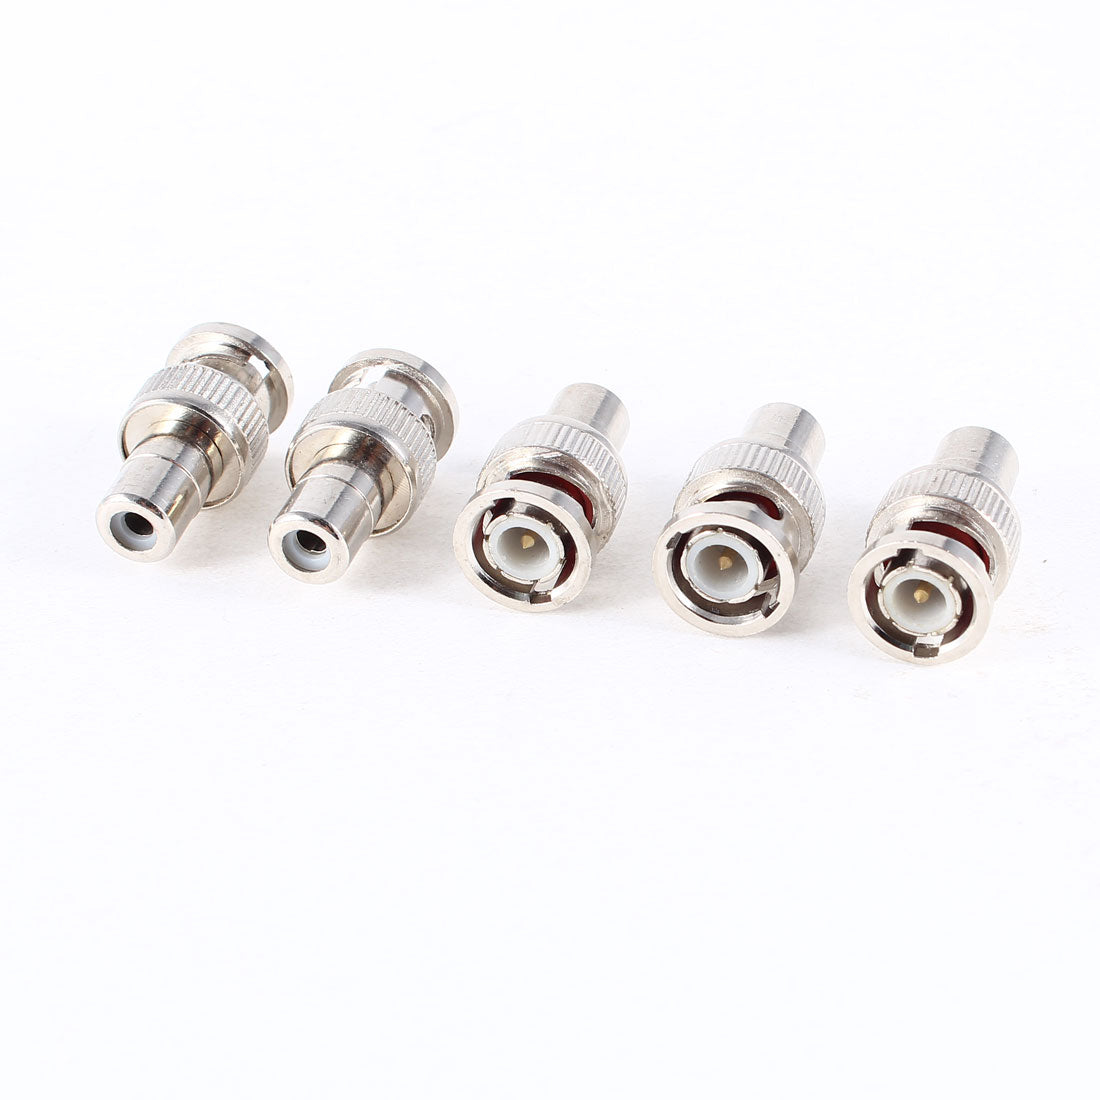 uxcell Uxcell 5 Pcs BNC Male to RCA Female Coax Cable Connector Adapter for CCTV Camera